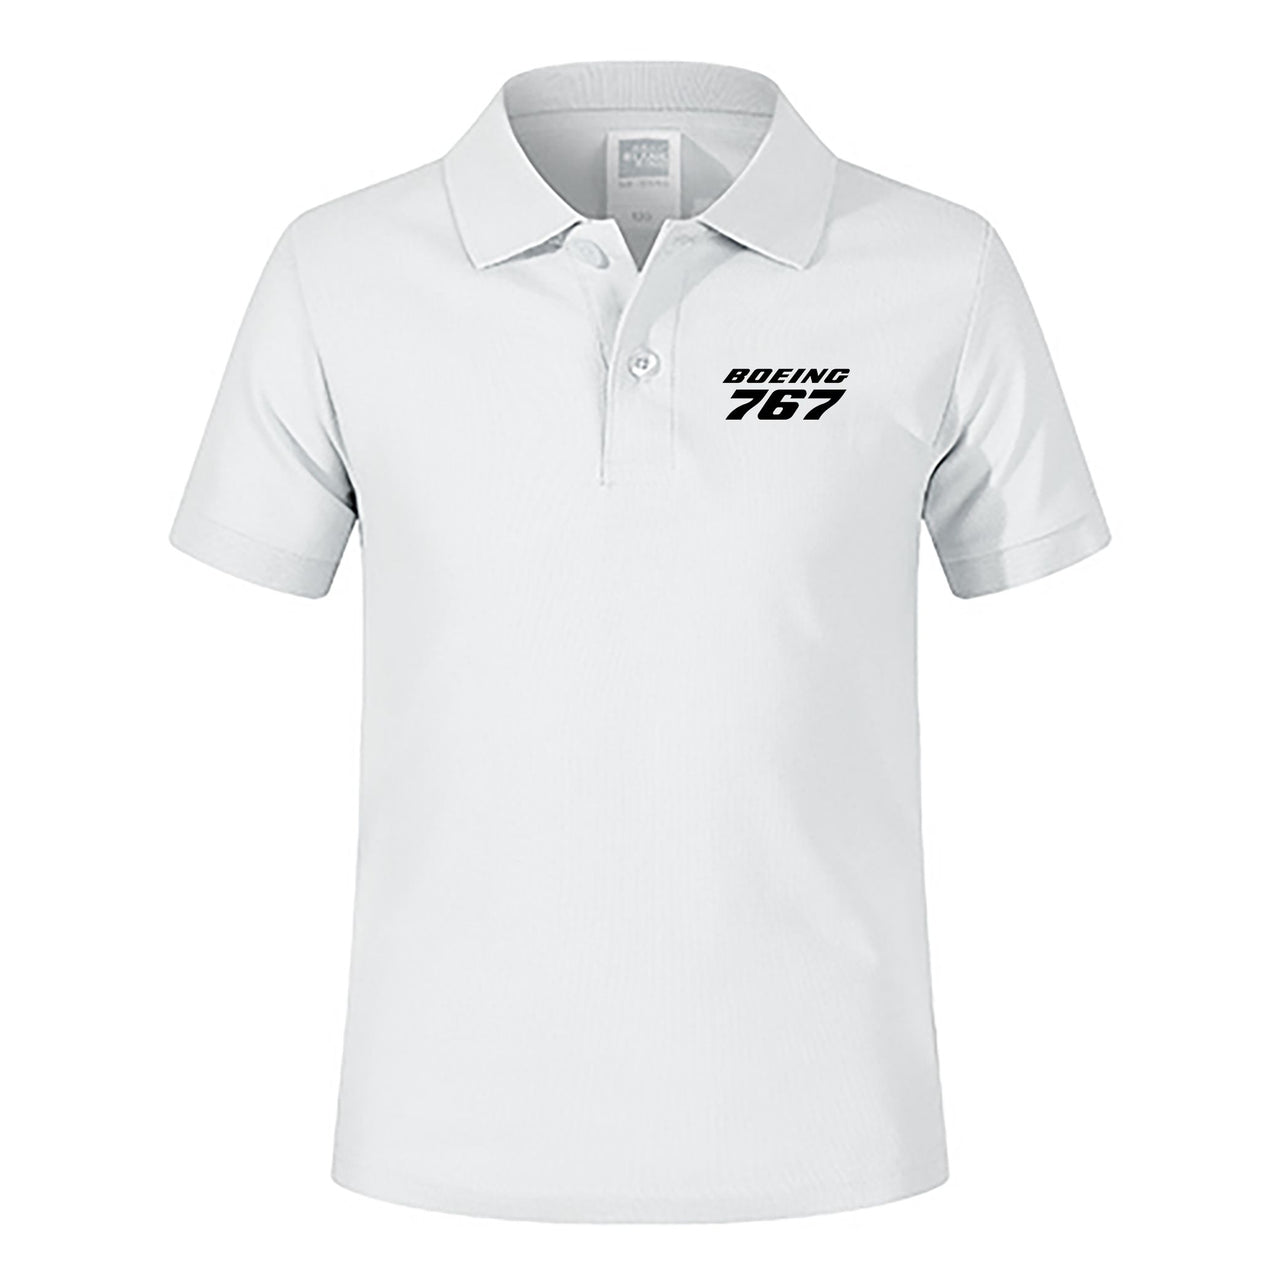 Boeing 767 & Text Designed Children Polo T-Shirts